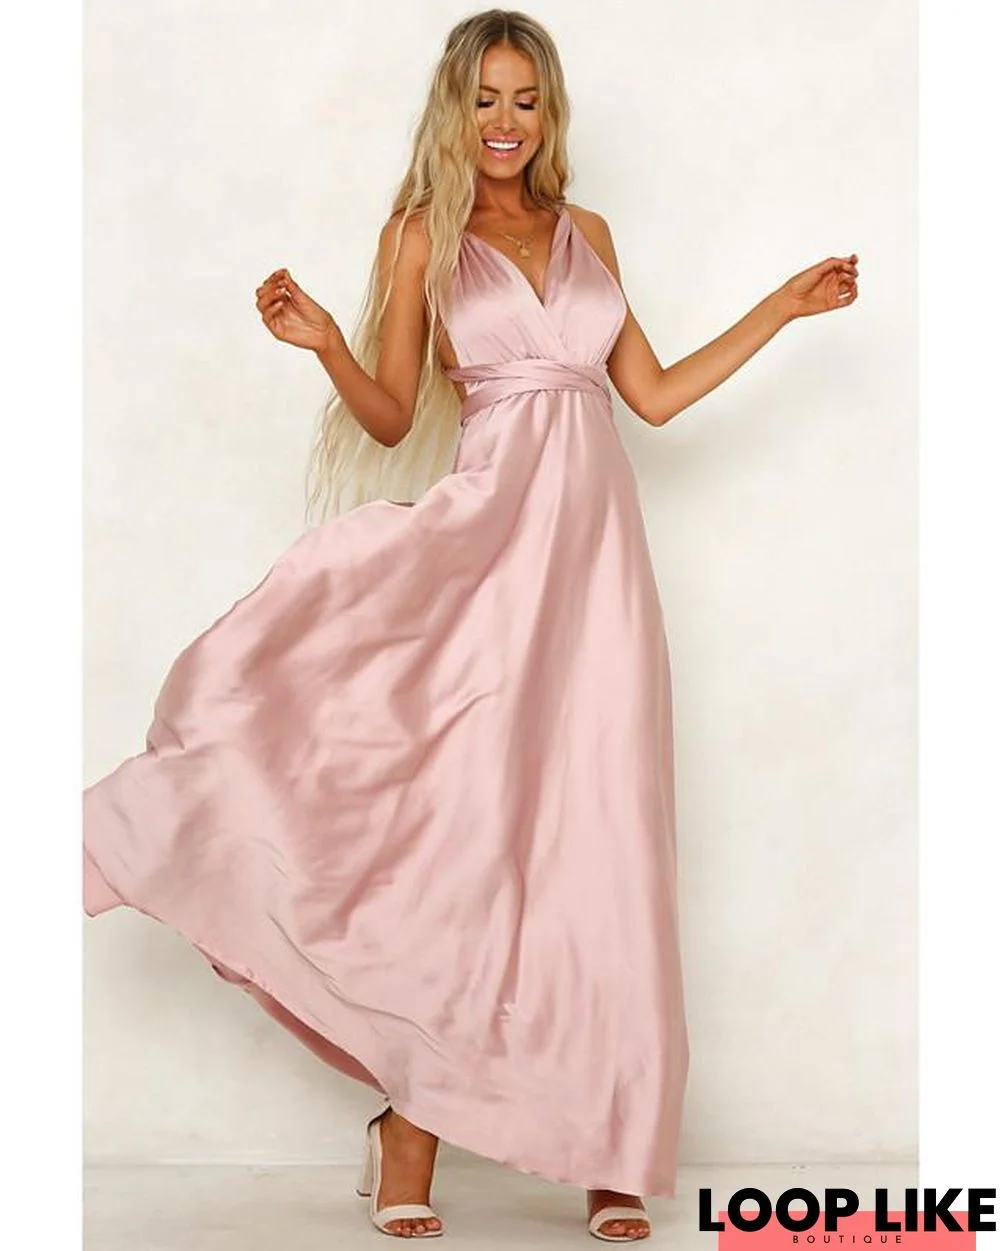 Women's Sheath Dress Maxi Long Dress Blushing Pink Green Sleeveless Solid Color Backless Summer V Neck Hot Sexy Party